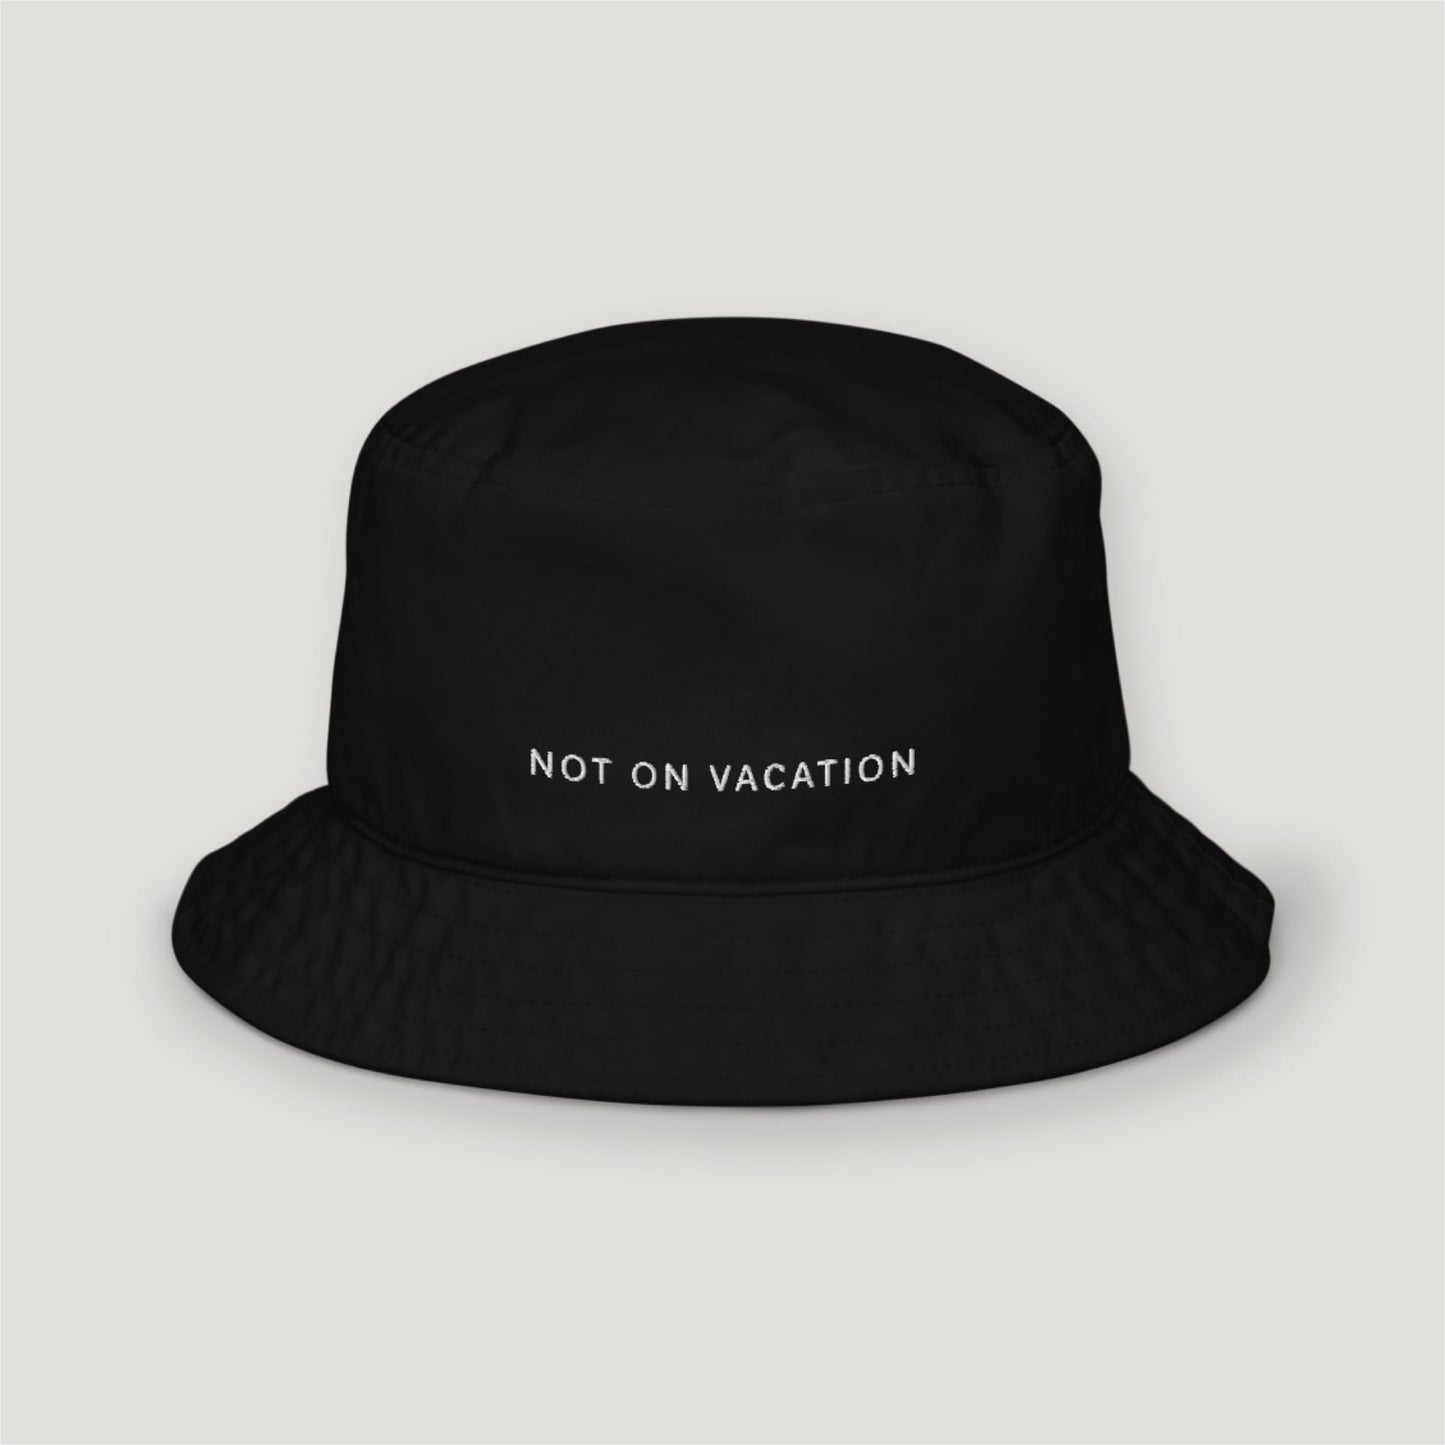 Not On Vacation Bucket Hat